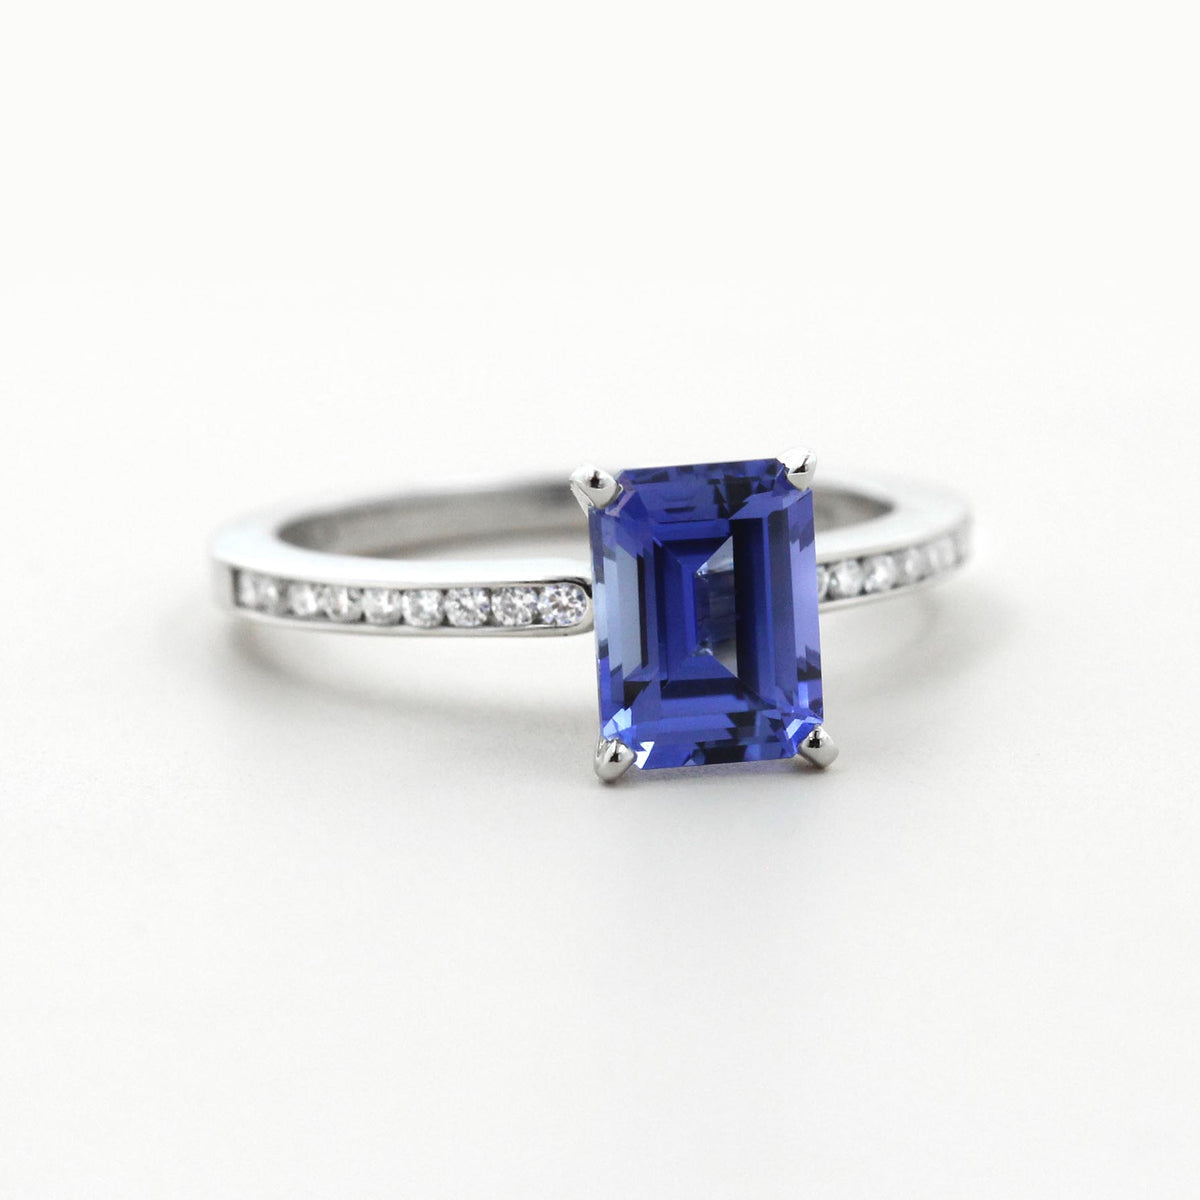 Shown with 1ct Radiant Cut Lab Grown Blue Sapphire in Platinum